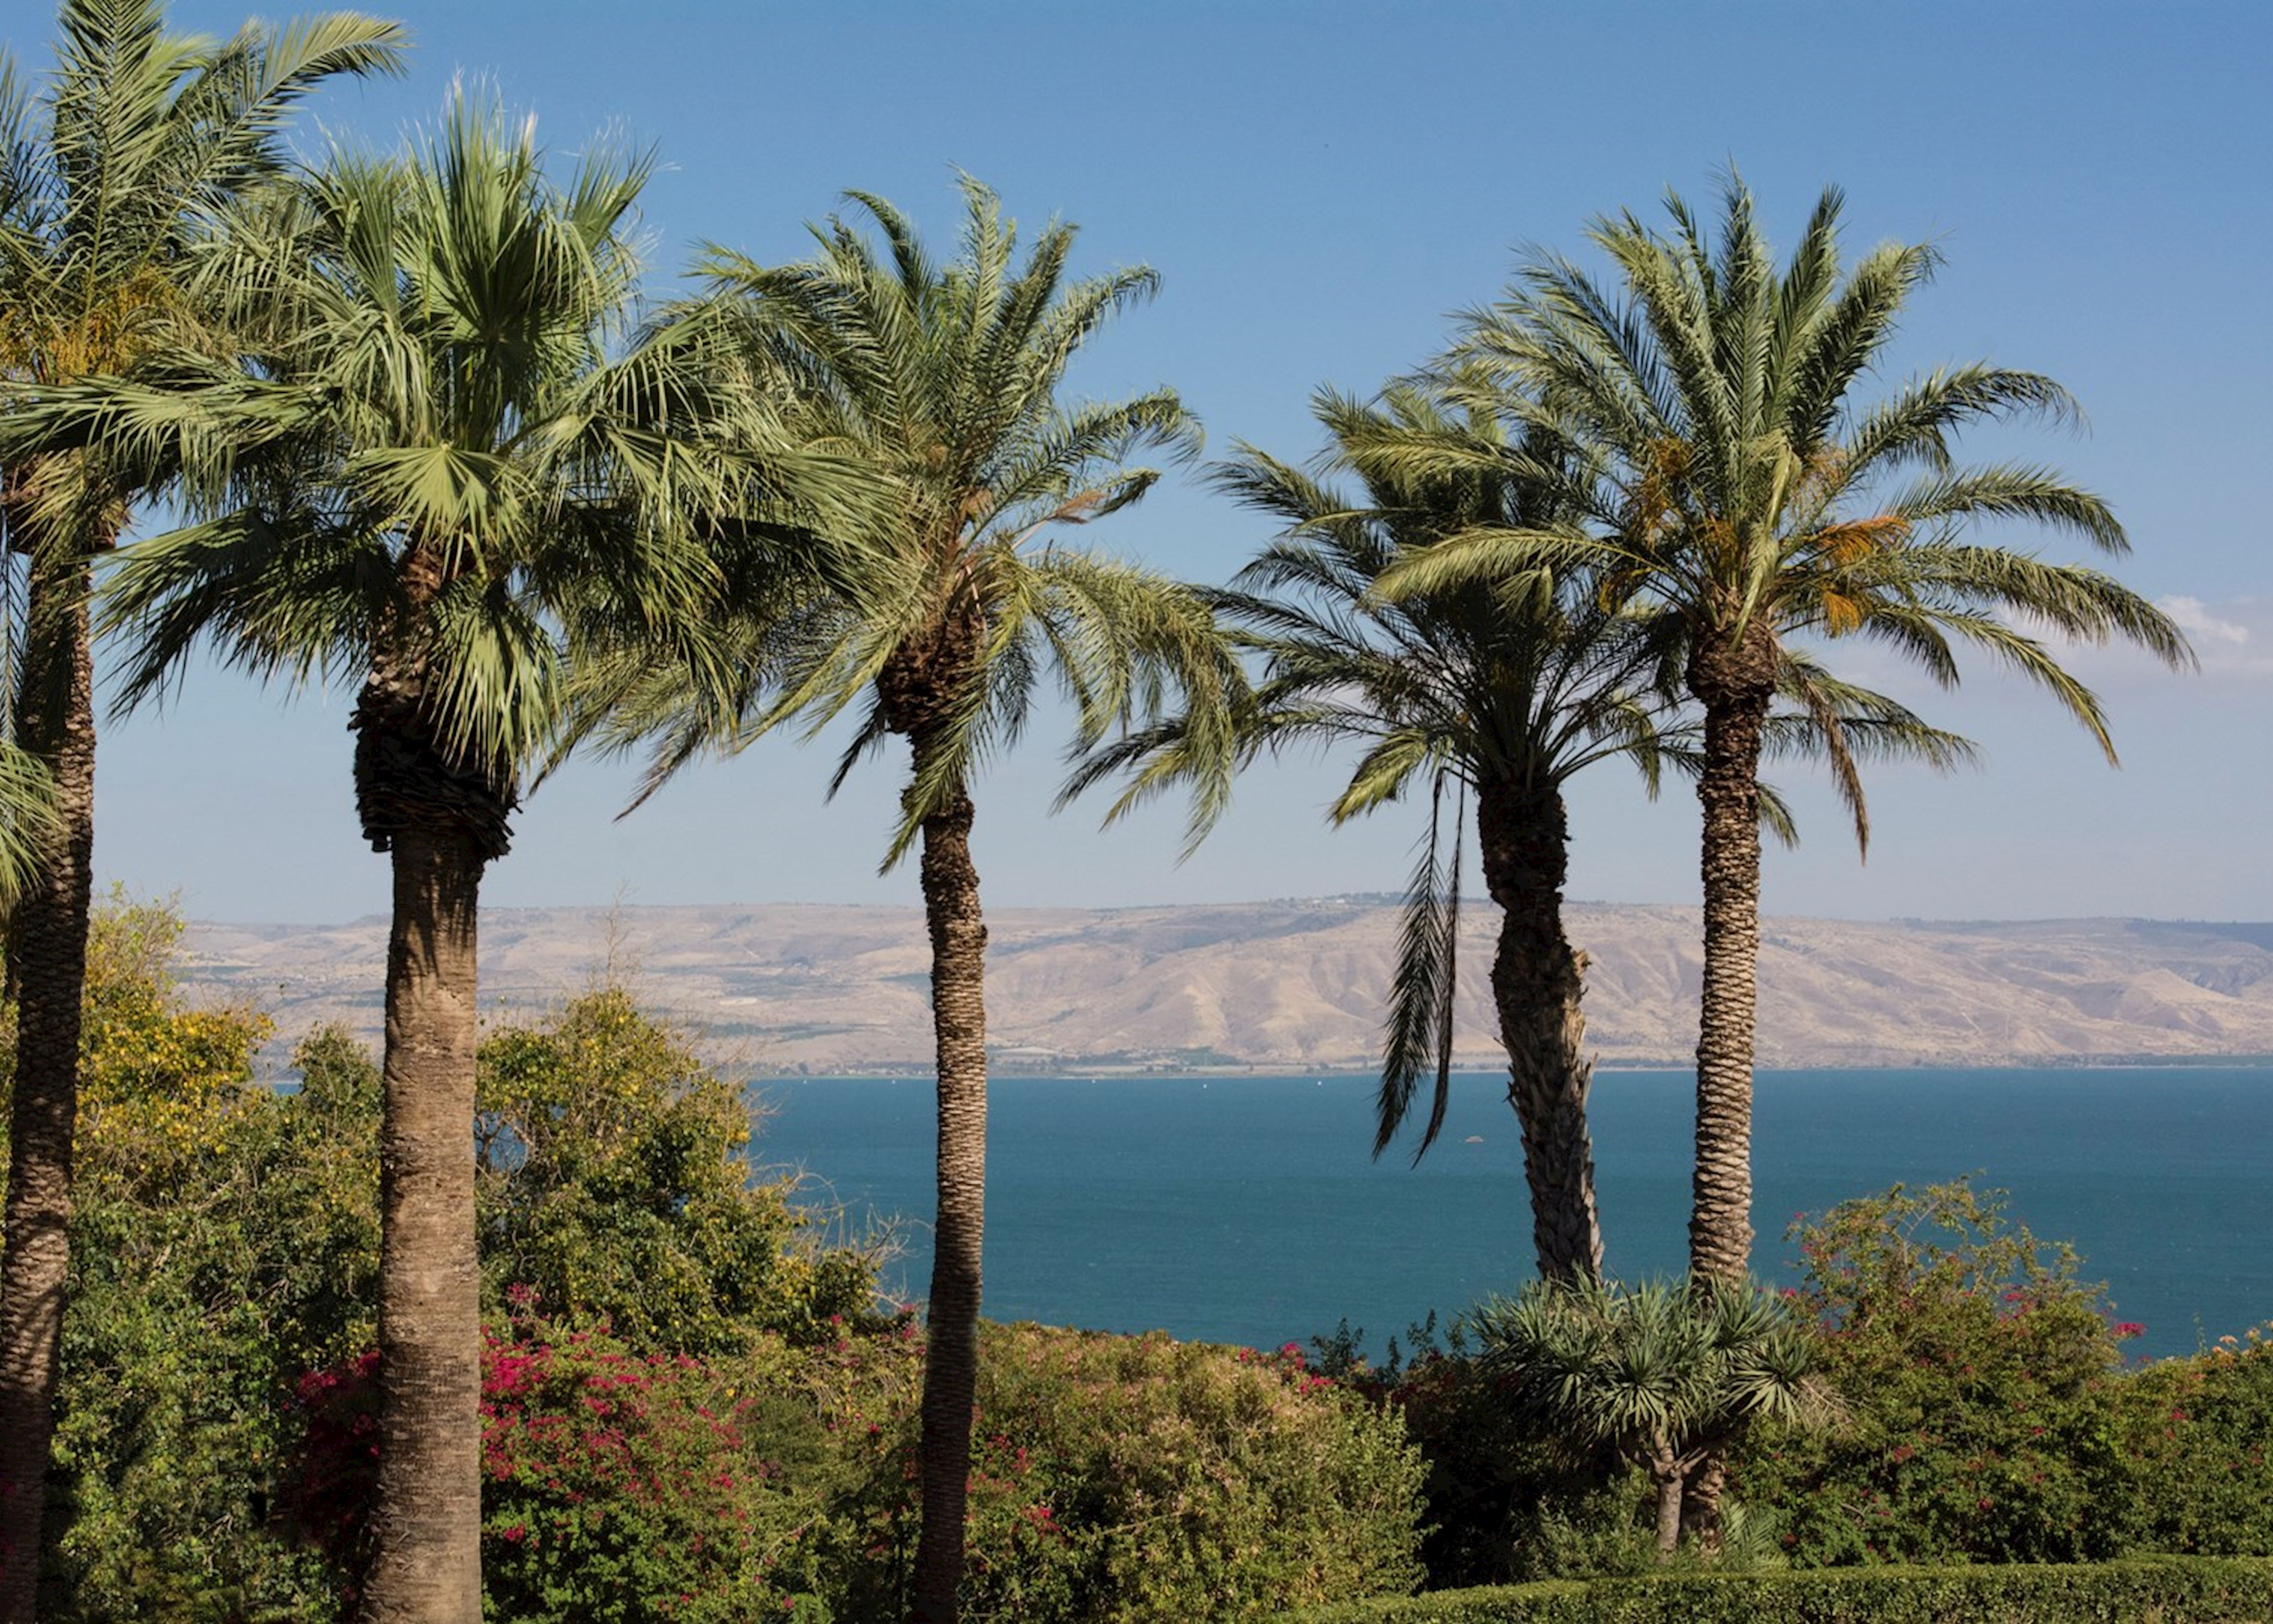 visit galilee on a trip to israel | audley travel